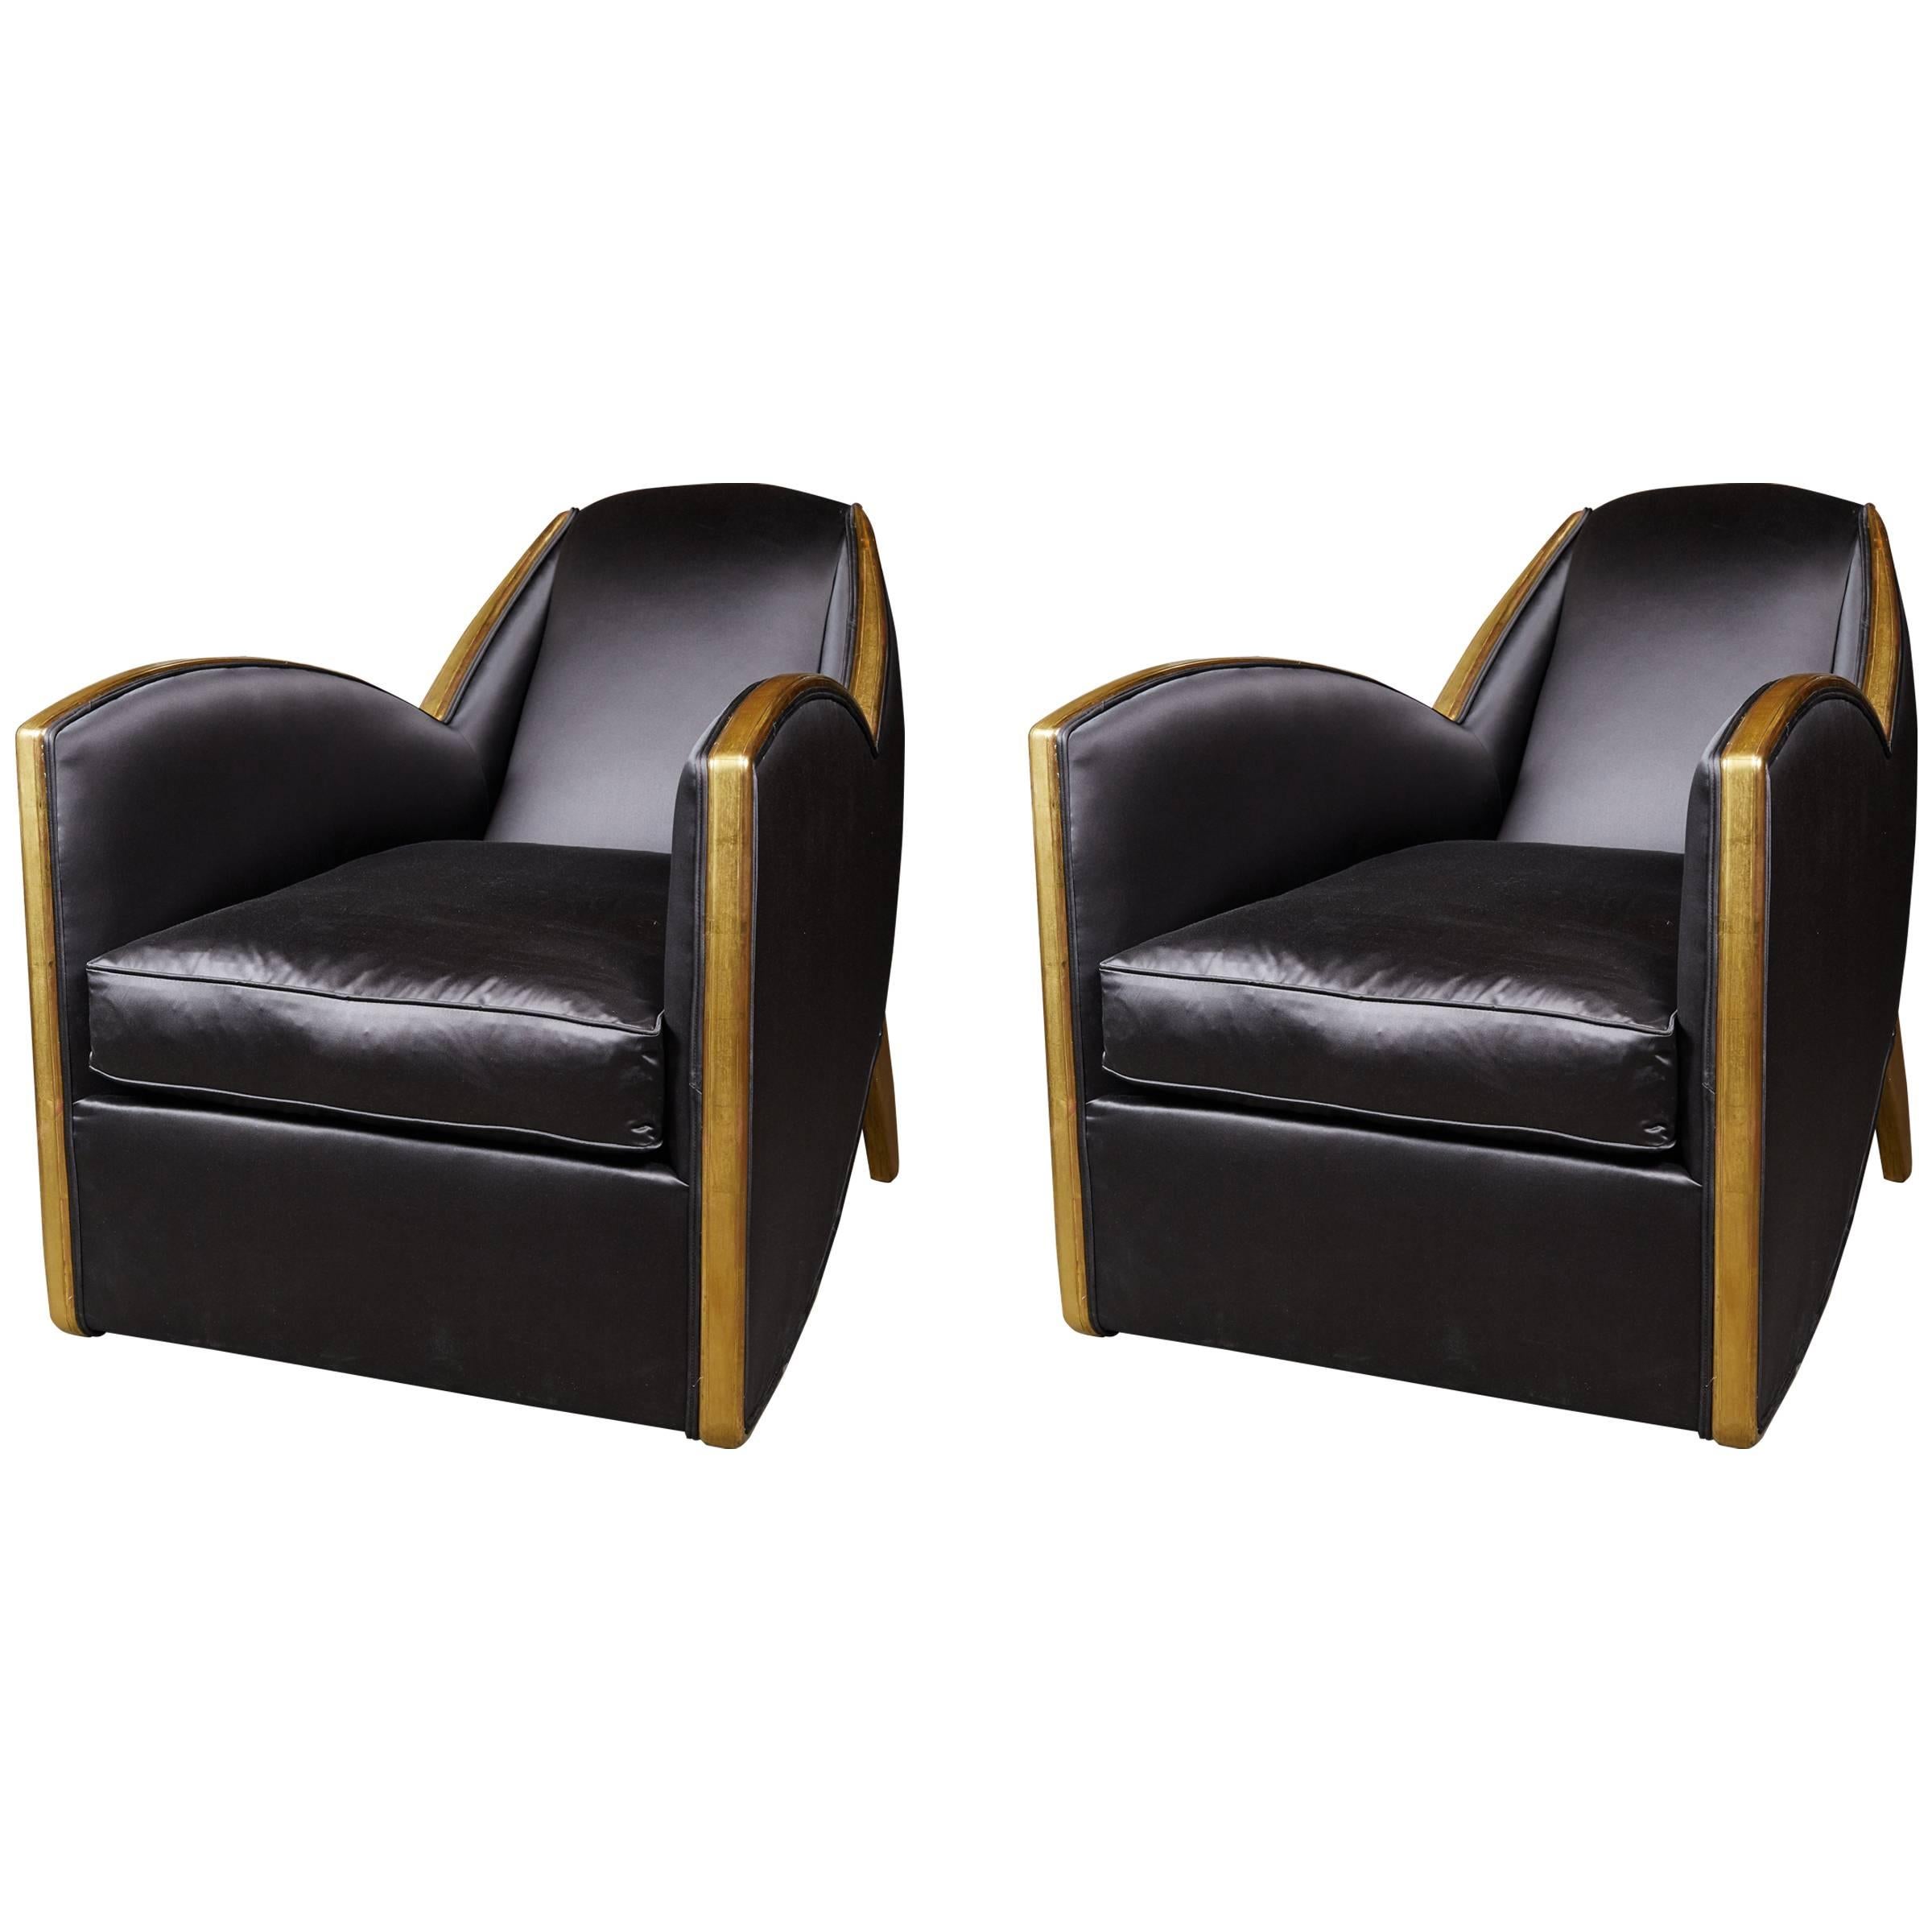  Fine And Stylish Pair of  Art Deco  Gilt Wood Chairs by Decoration  Levitan.